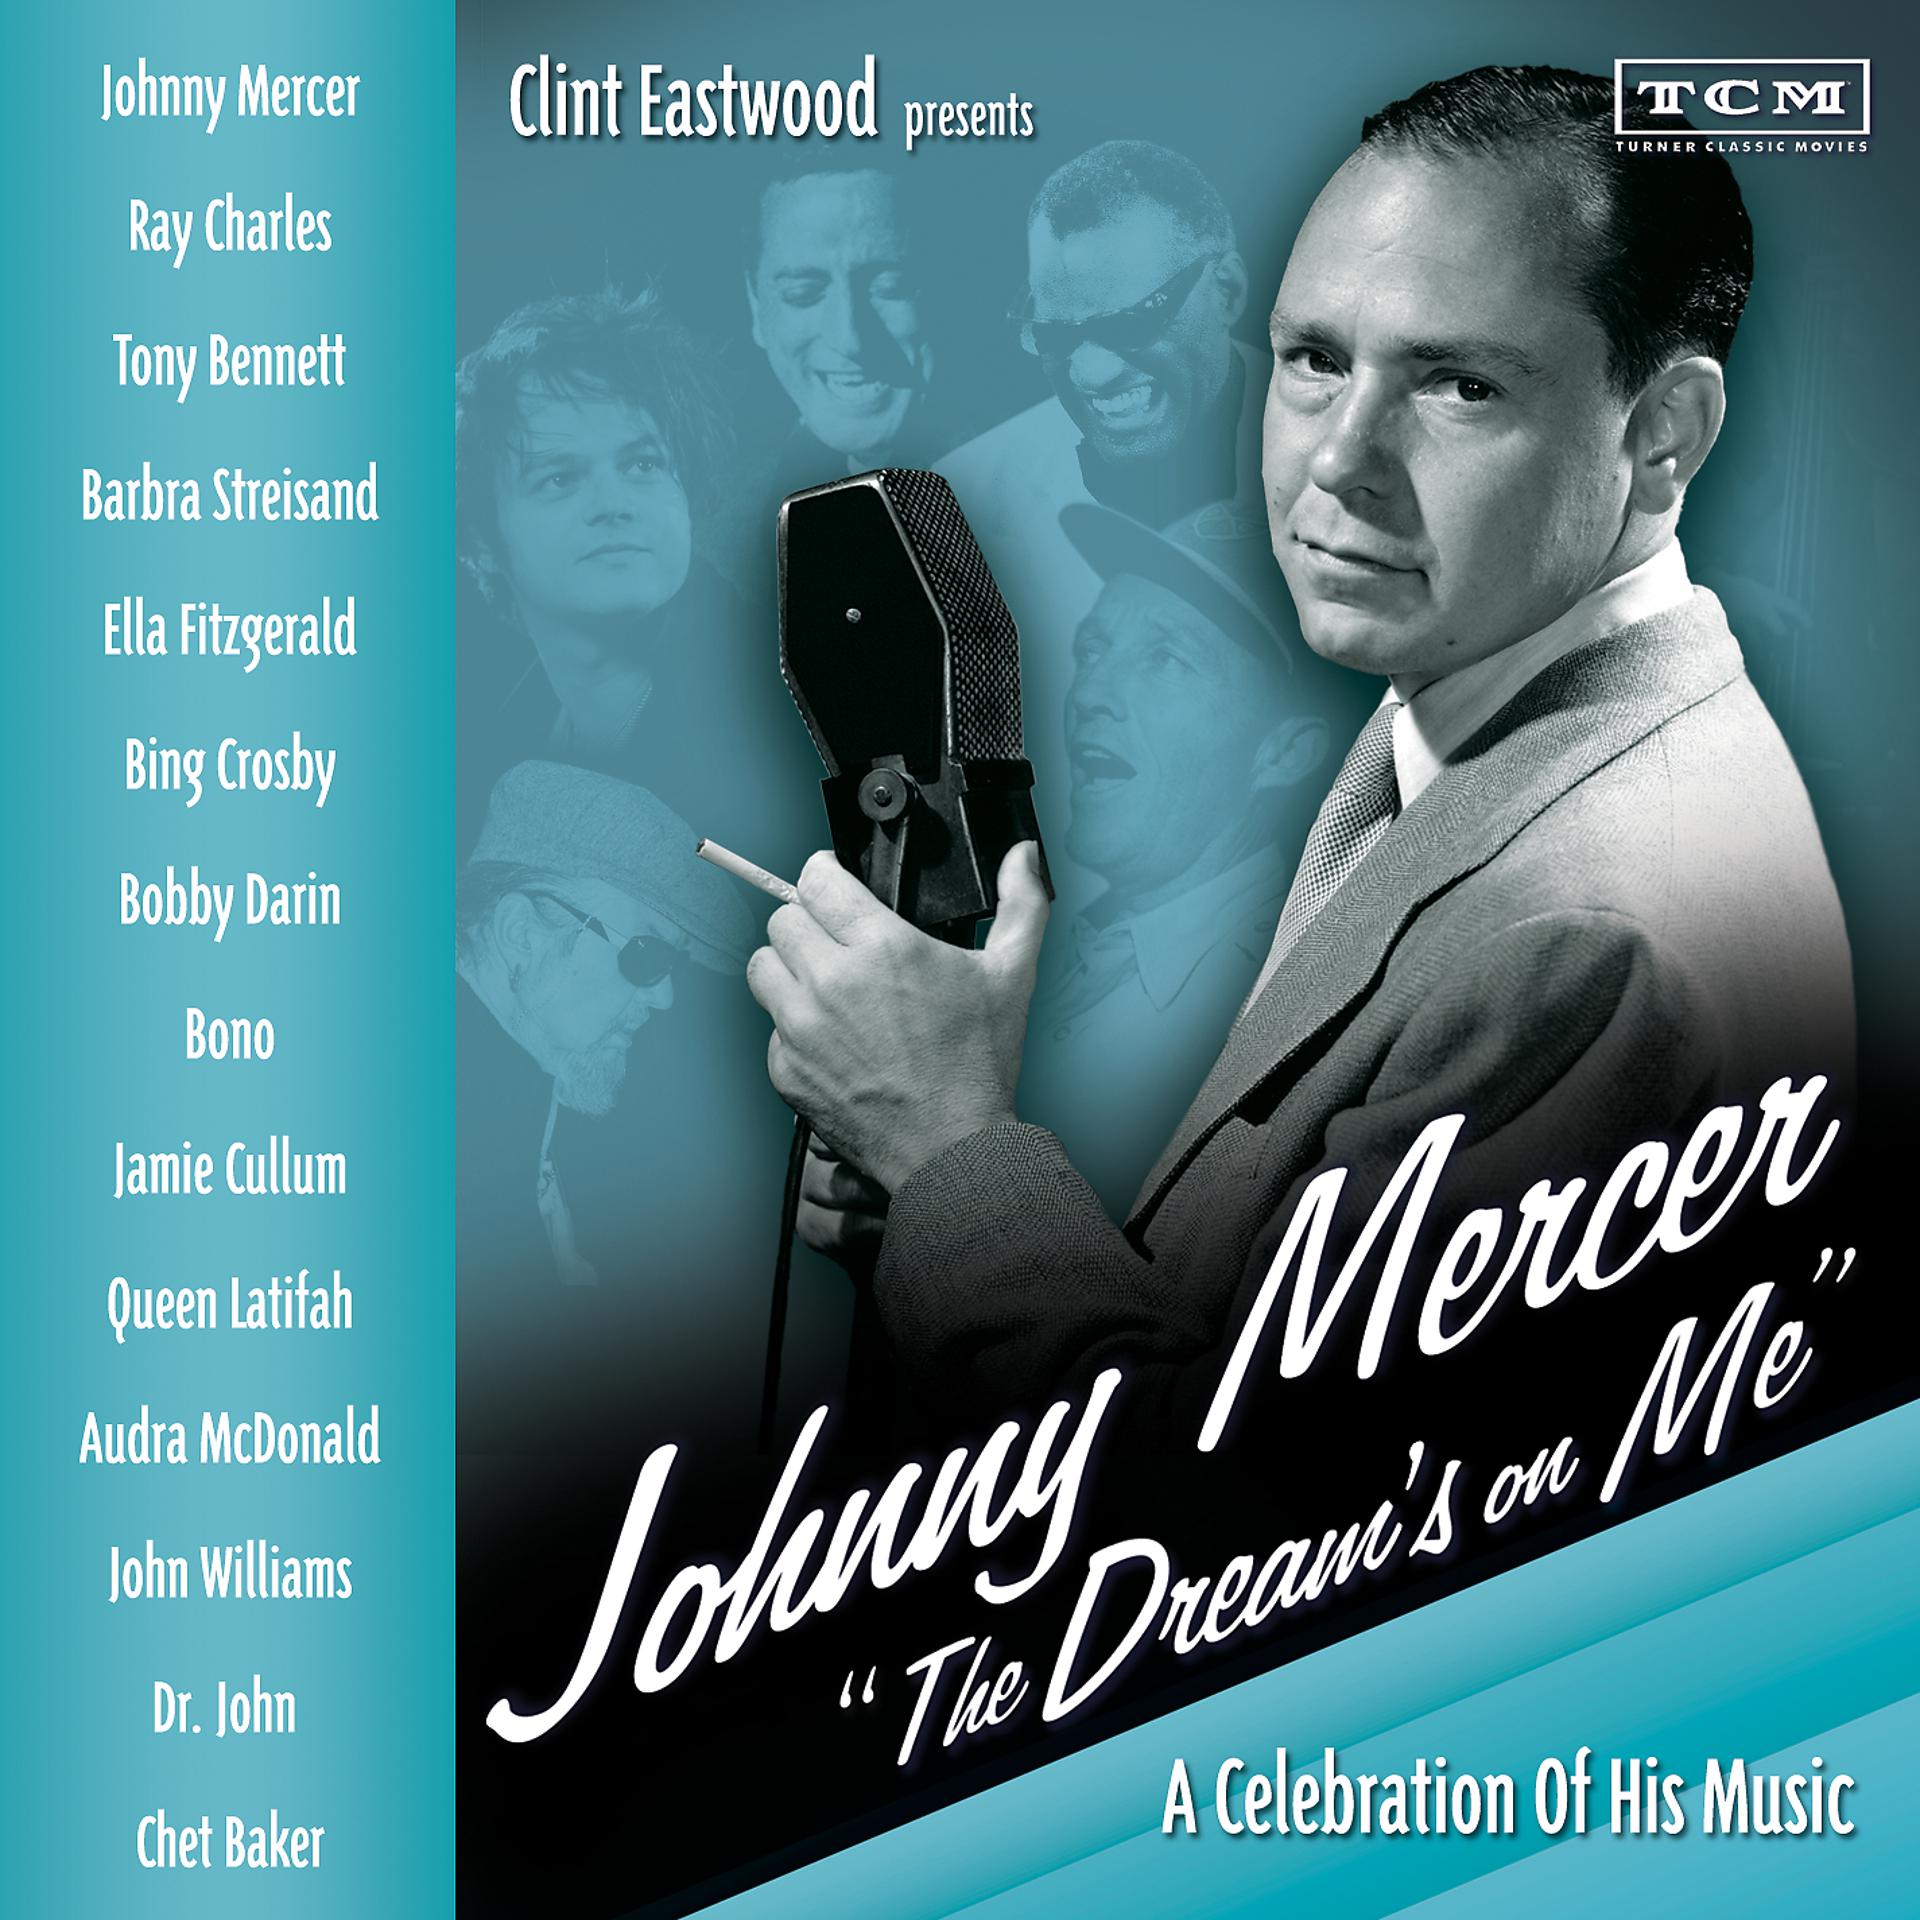 Постер альбома Clint Eastwood Presents: Johnny Mercer "The Dream's On Me" - A Celebration of His Music